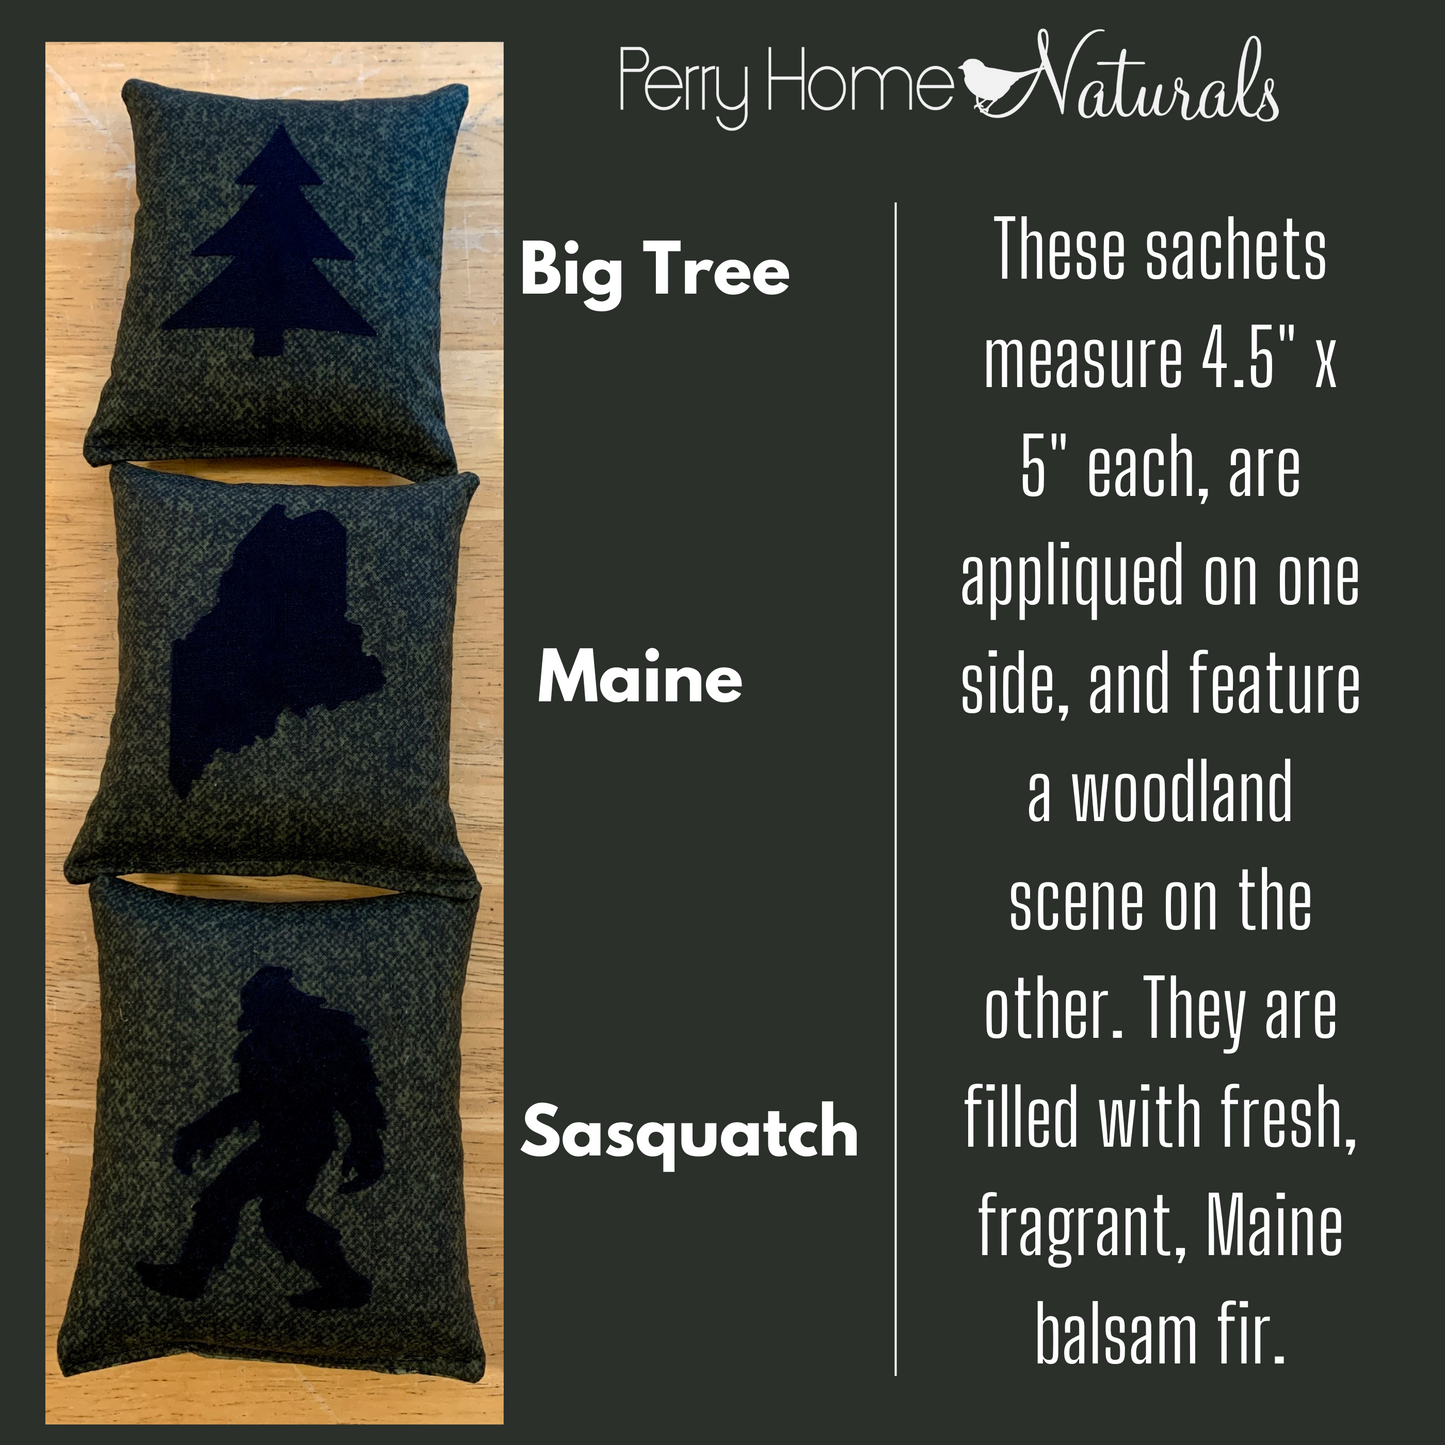 Maine Balsam Fir Pillow with Woodland Scene and Applique